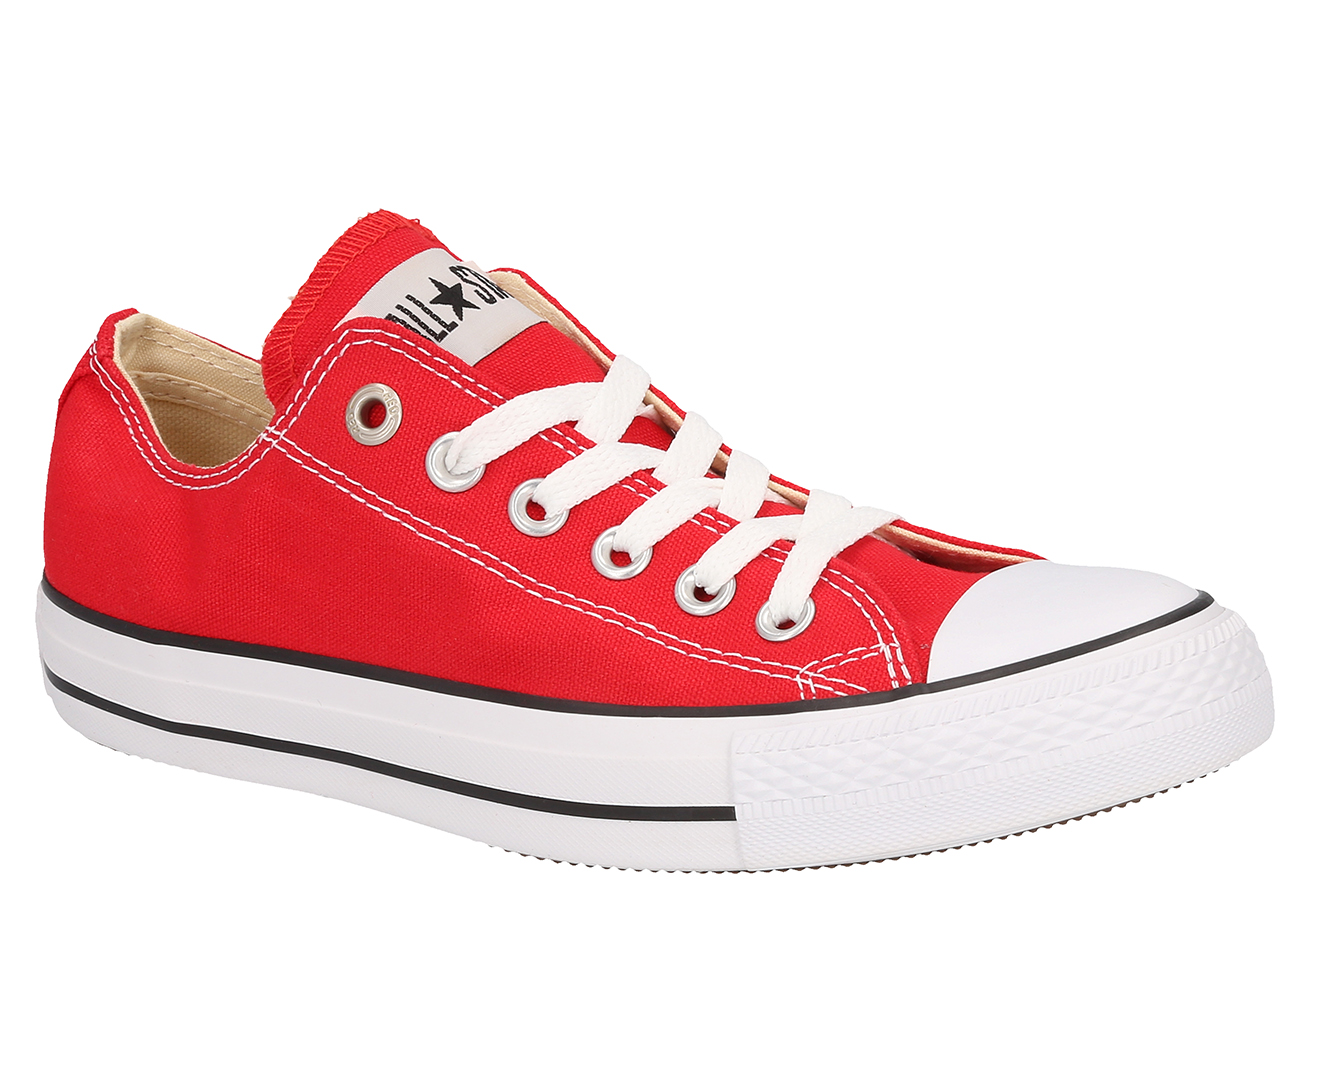 Converse Chuck Taylor All Star Shoe Ox Red Au 